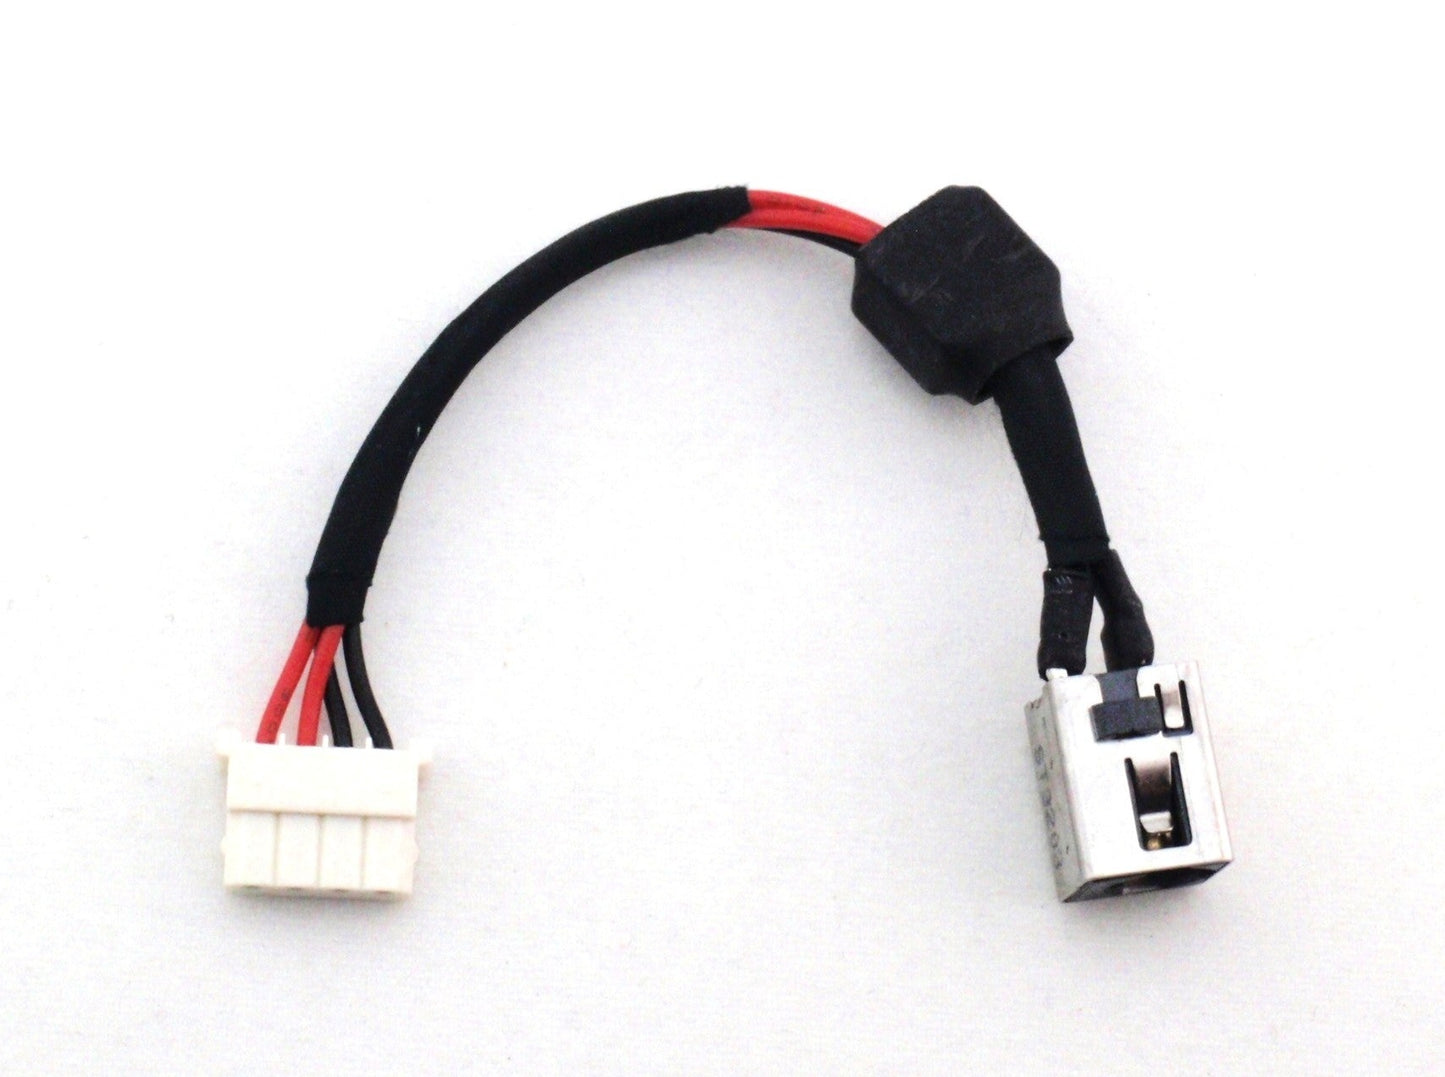 Toshiba DC In Power Jack Charging Port Cable Satellite C800 C805 C840 C840D C845 C845D L800 L840 L840D L845 L845D M805 A000174270